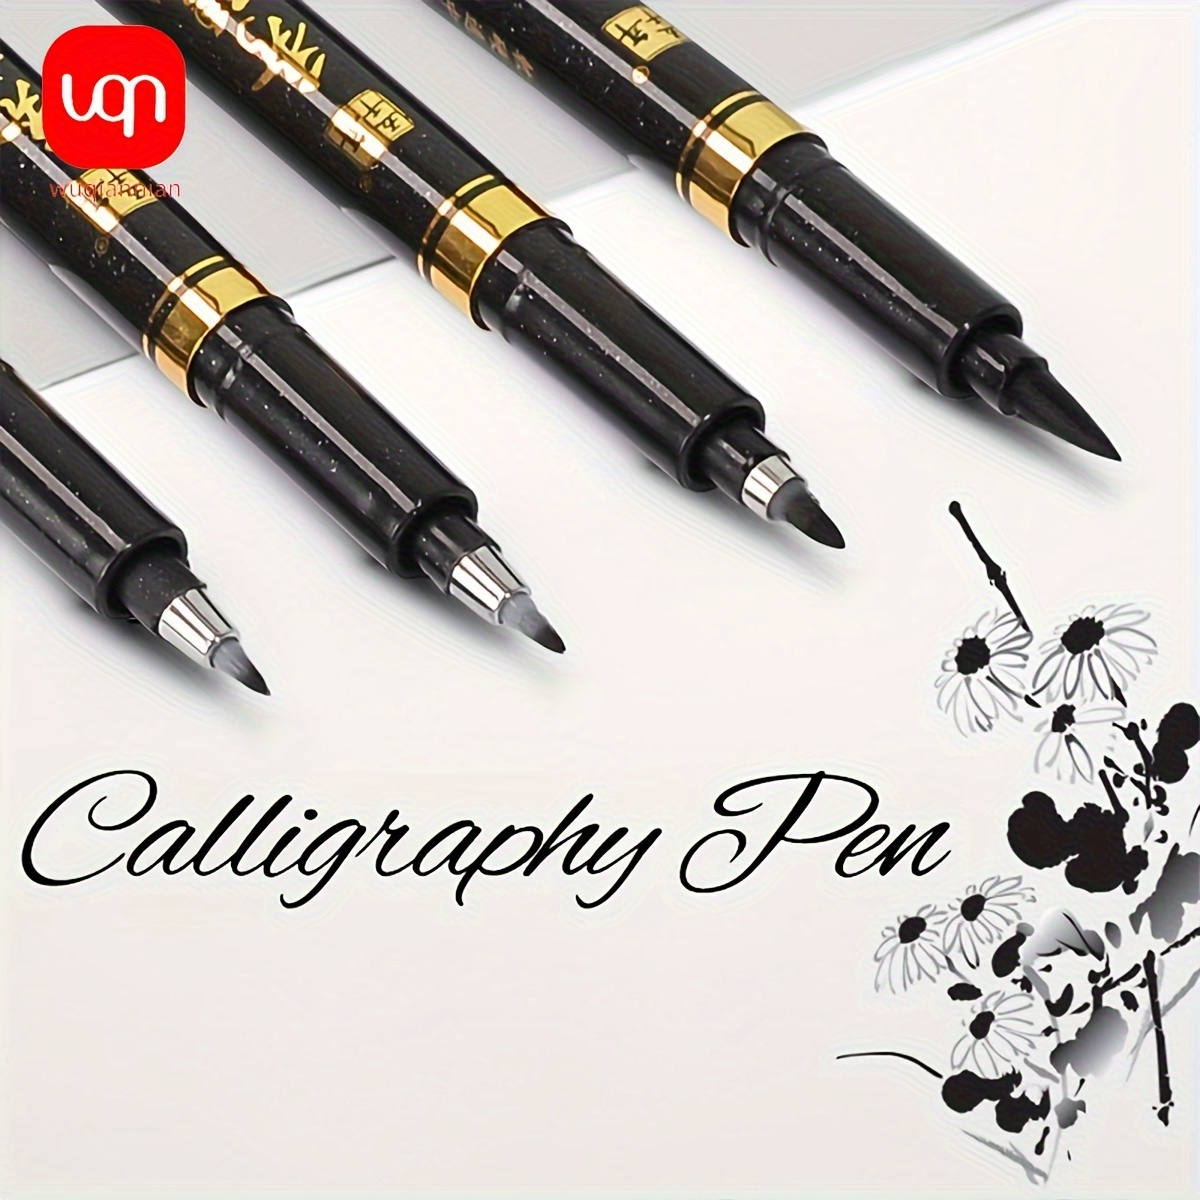 

1pc/6pcs/set 5-piece Calligraphy Pen And Brush Set - Writing, Art, Painting, Signature, Non Fading, Black Ink& 4 Different Sizes (0.6mm/0.7mm/0.8mm/1mm)